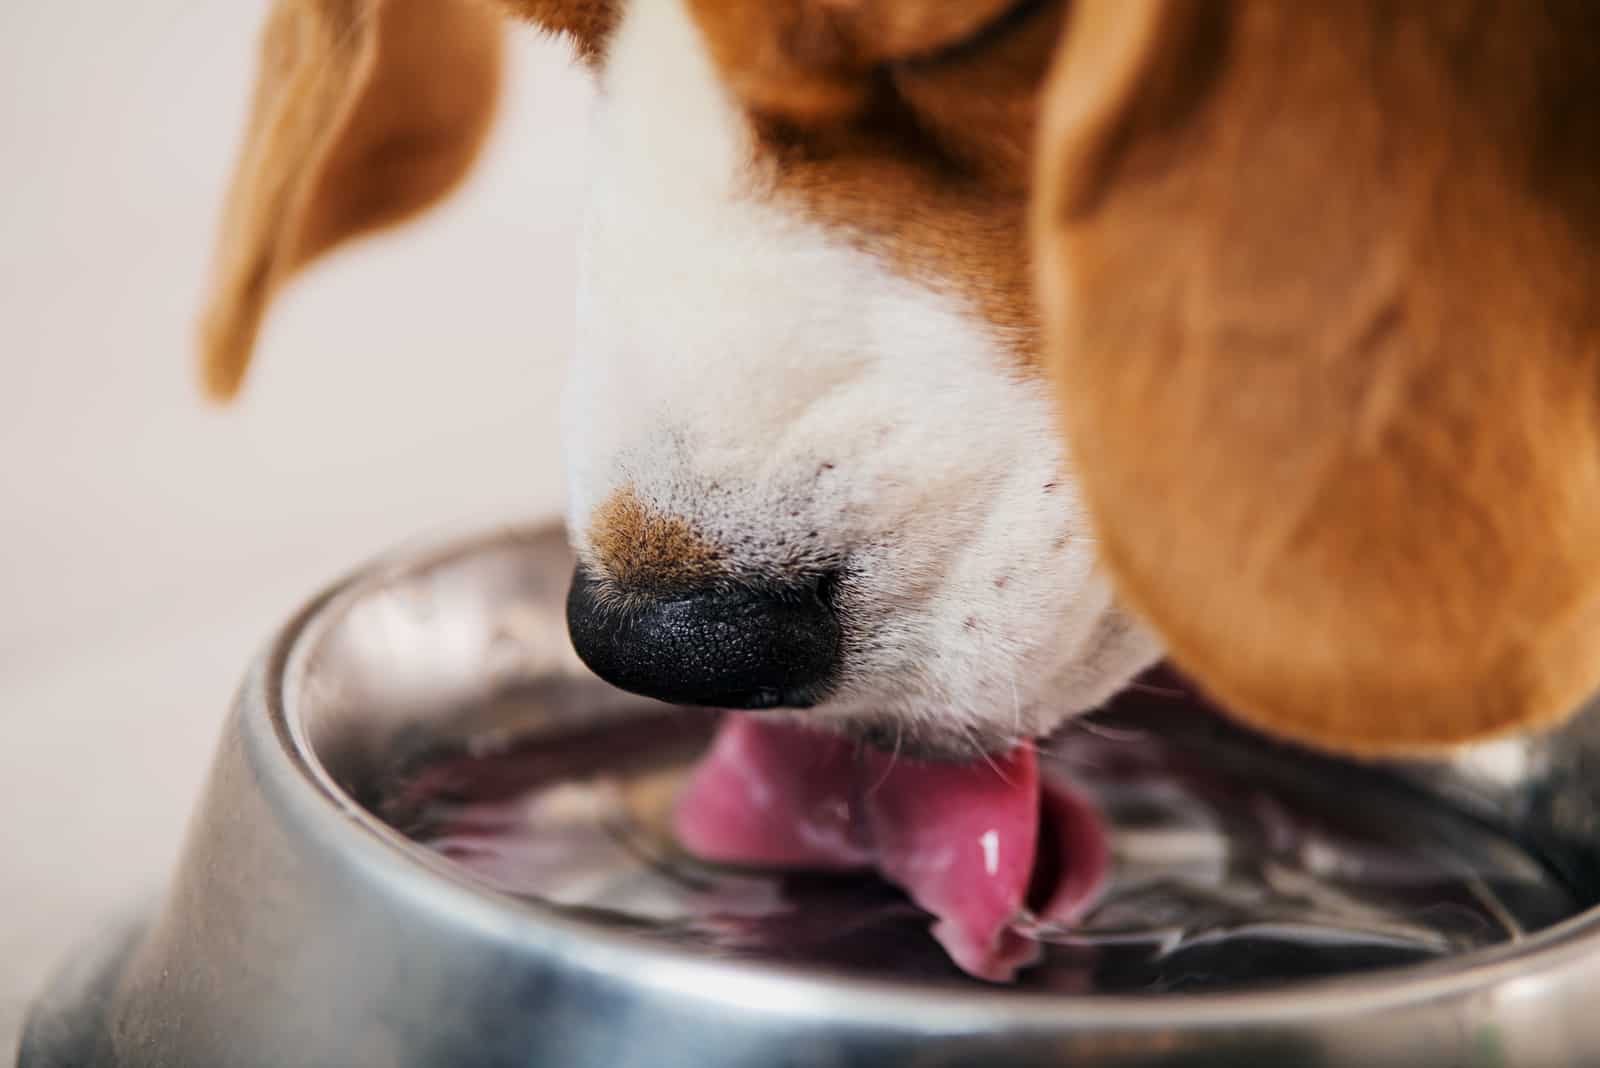 the dog drinks water from a bowl